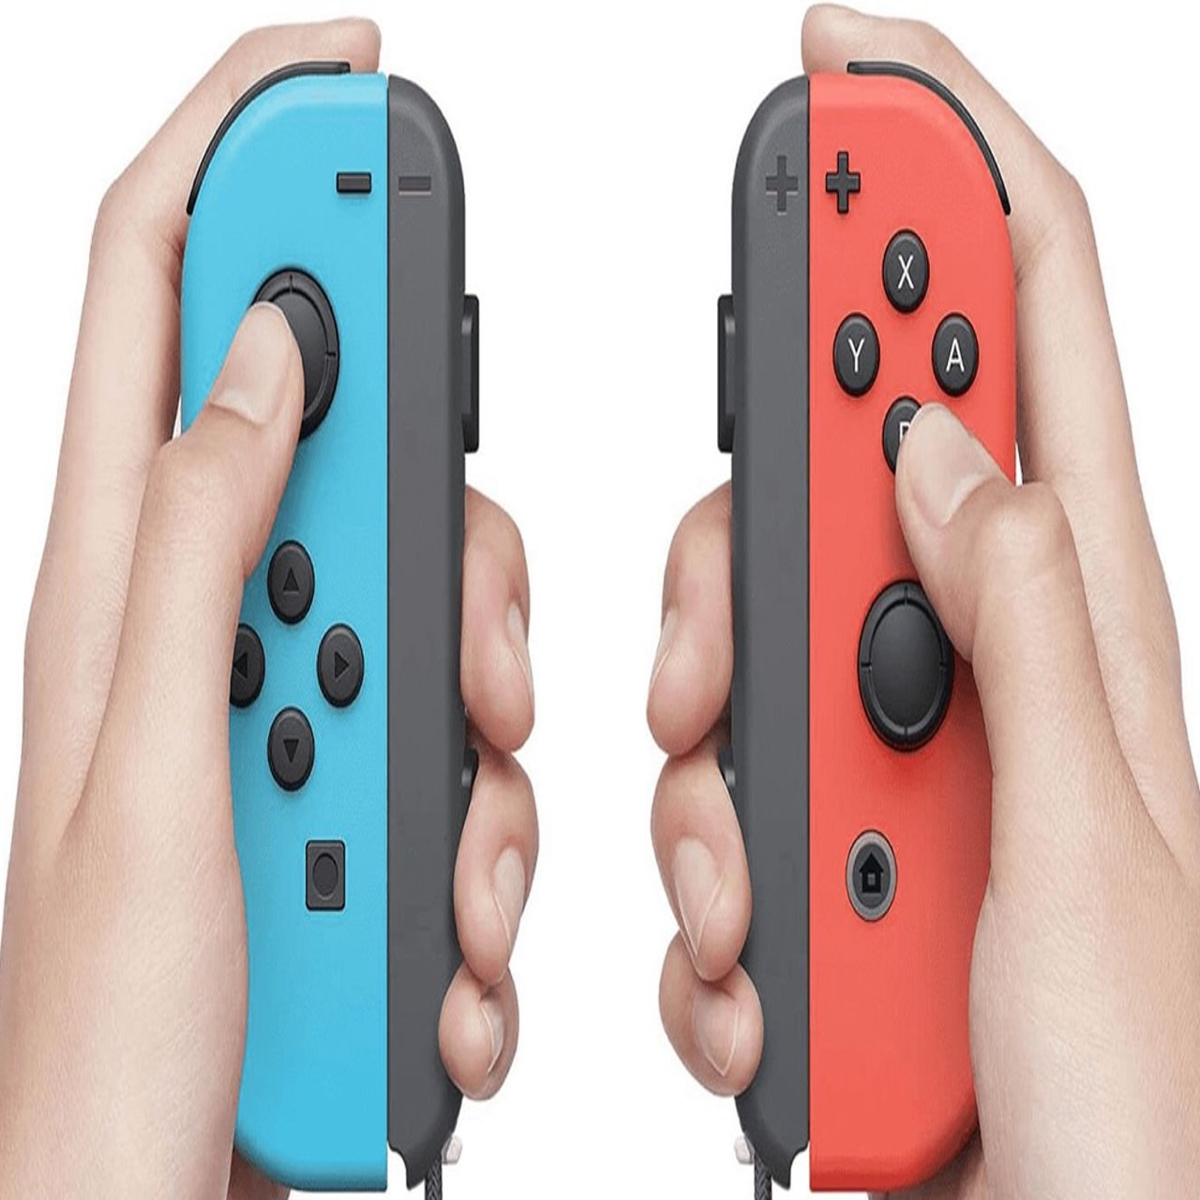 Nintendo Switch Joy-Con drift due to design flaw, UK consumer group  reports